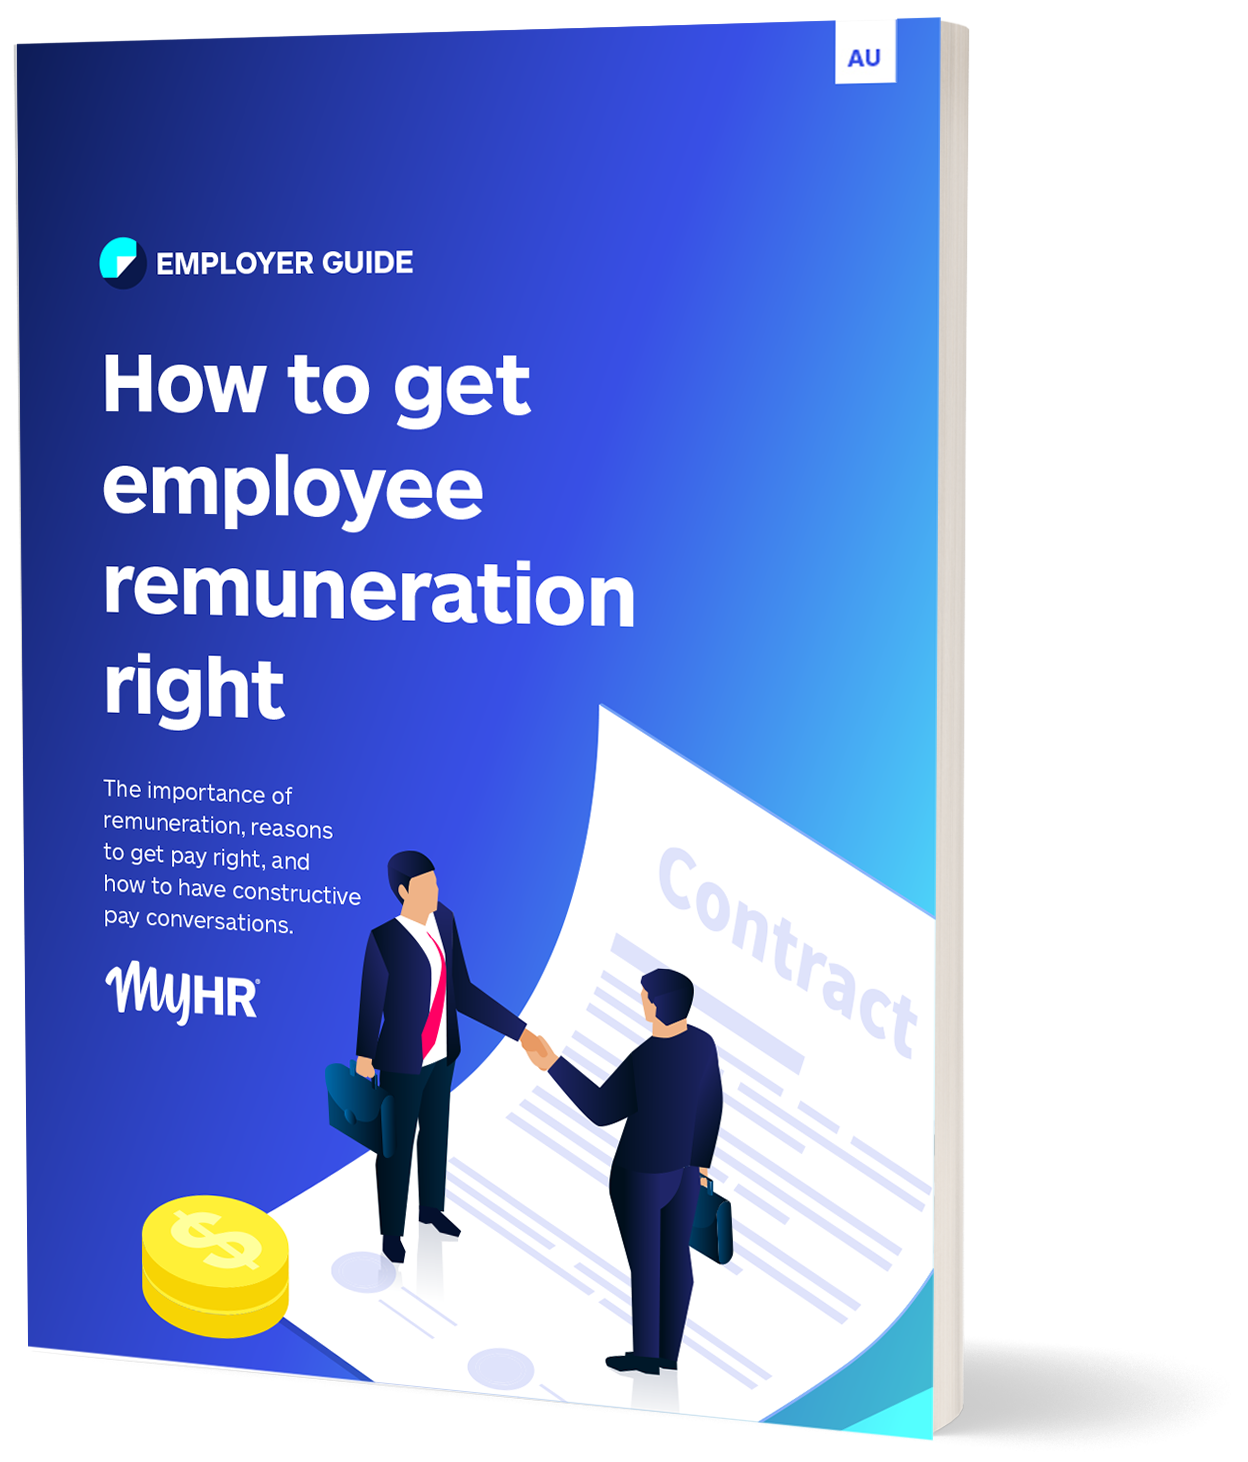 AU Guide Image_Remuneration_Employee GuideImages